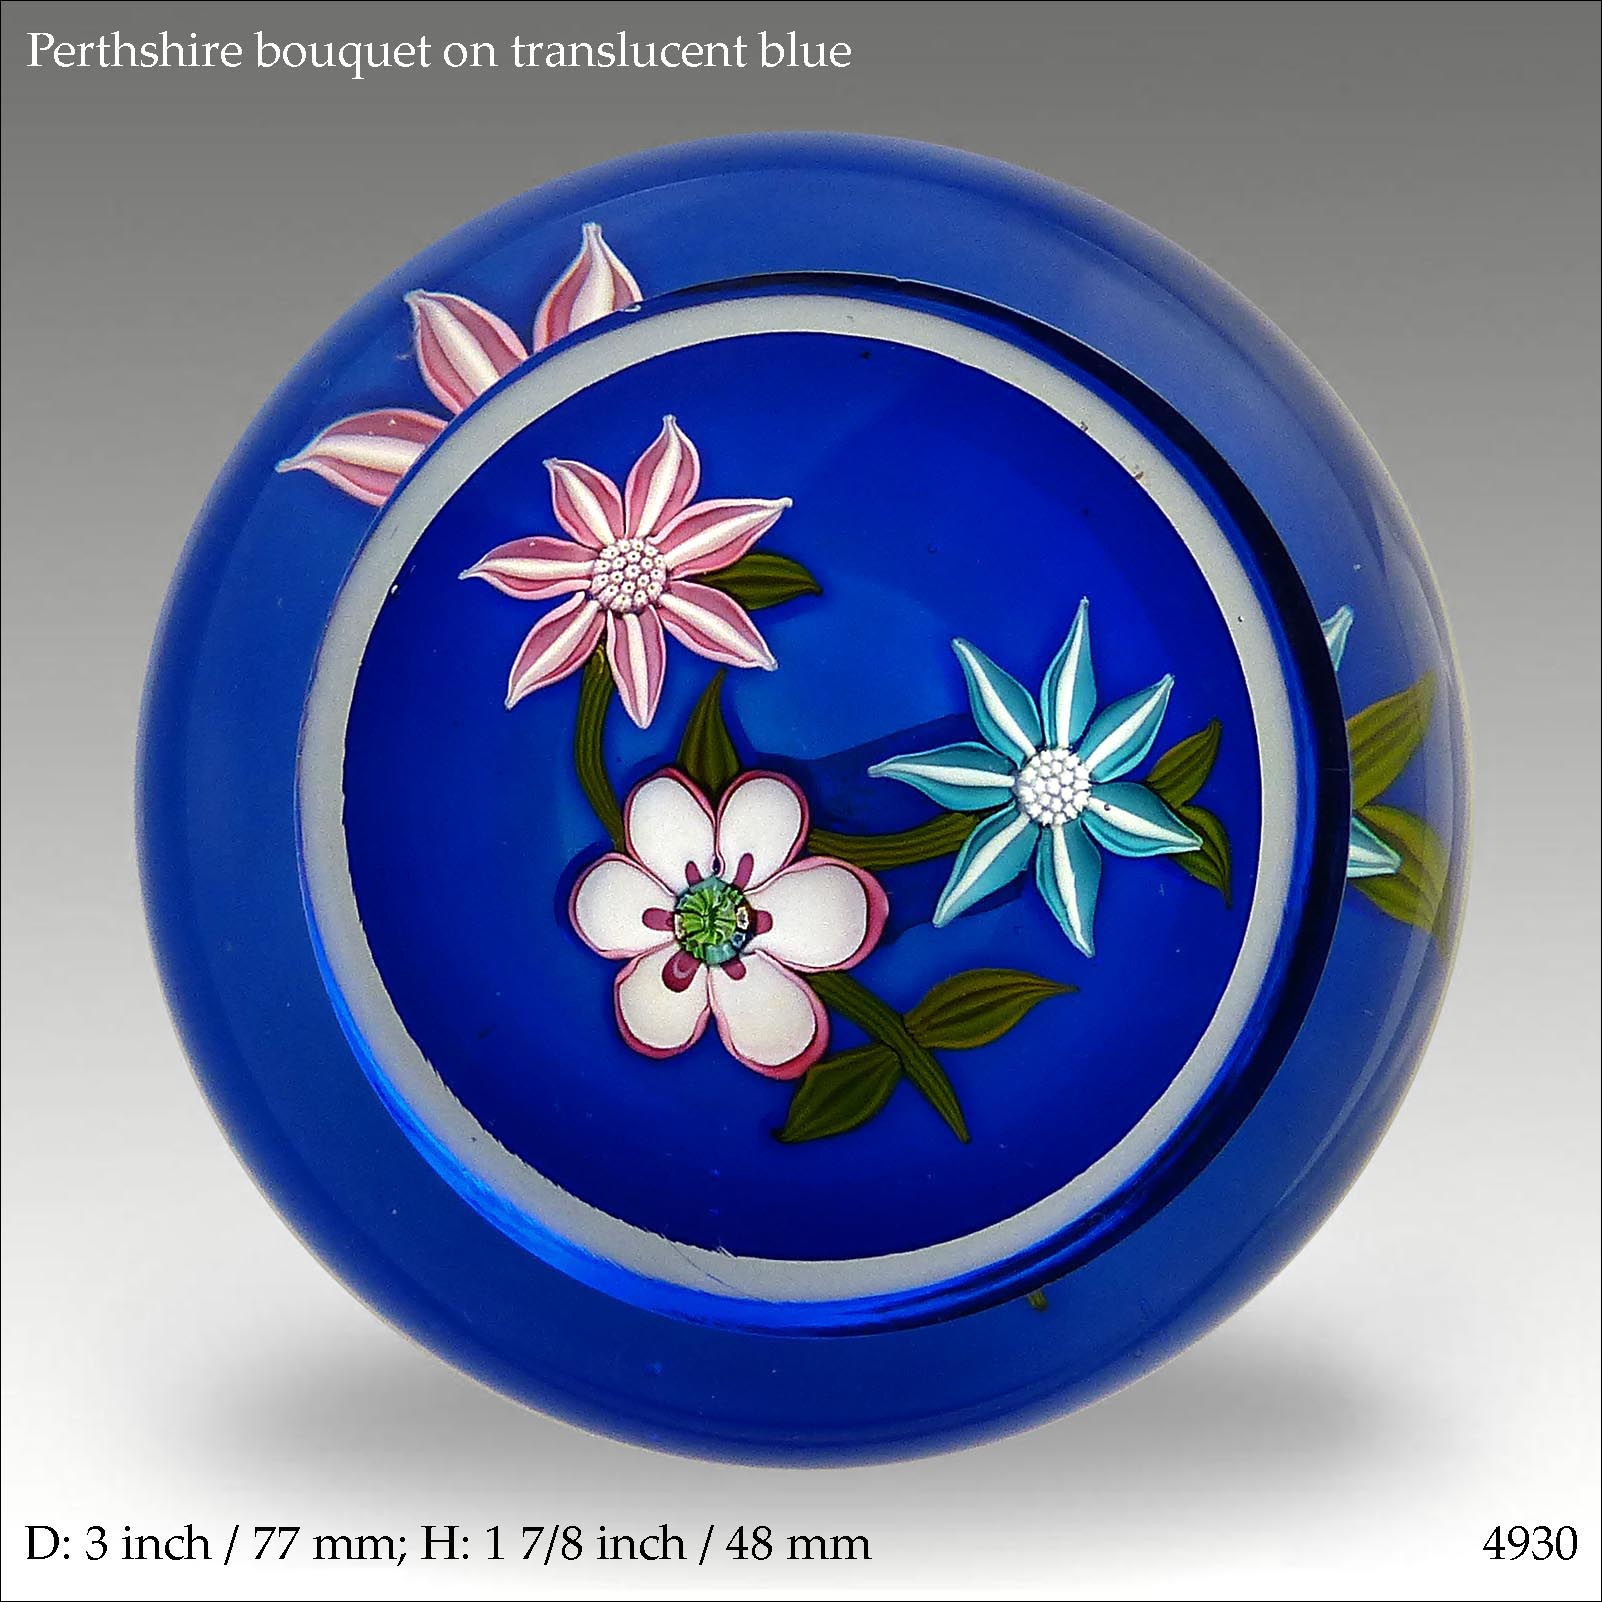 Perthshire 1 of 1 bouquet paperweight (ref. 4930)